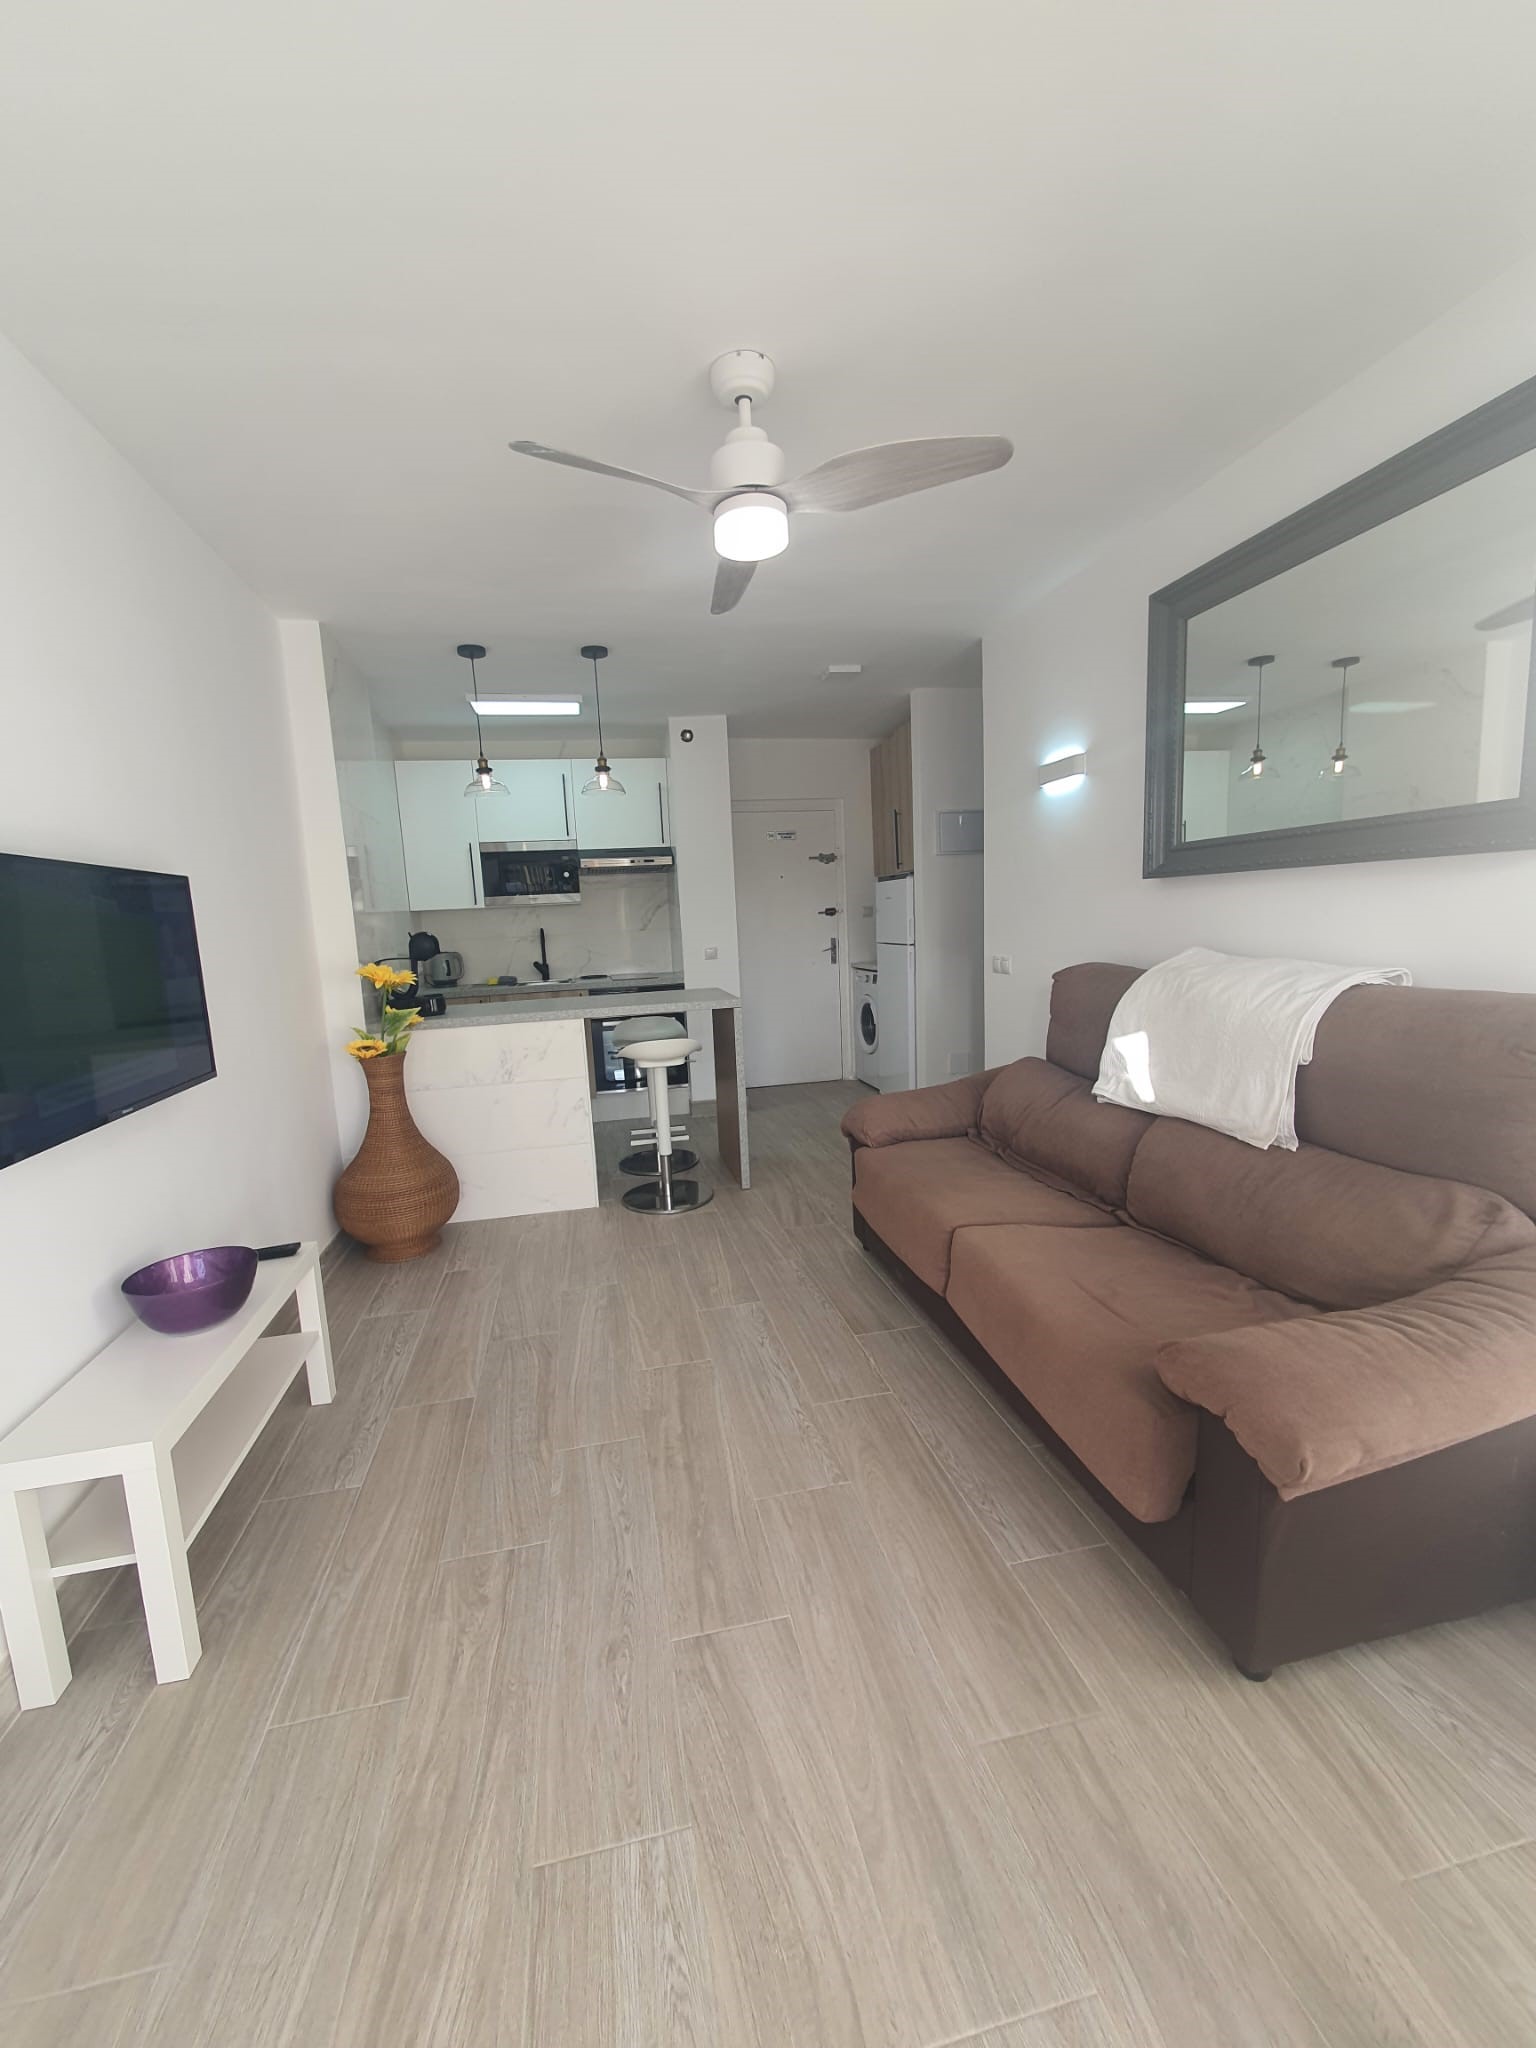 Holiday One bedroom Apartment In IRIS, Benalmádena. VFT/MA/57935